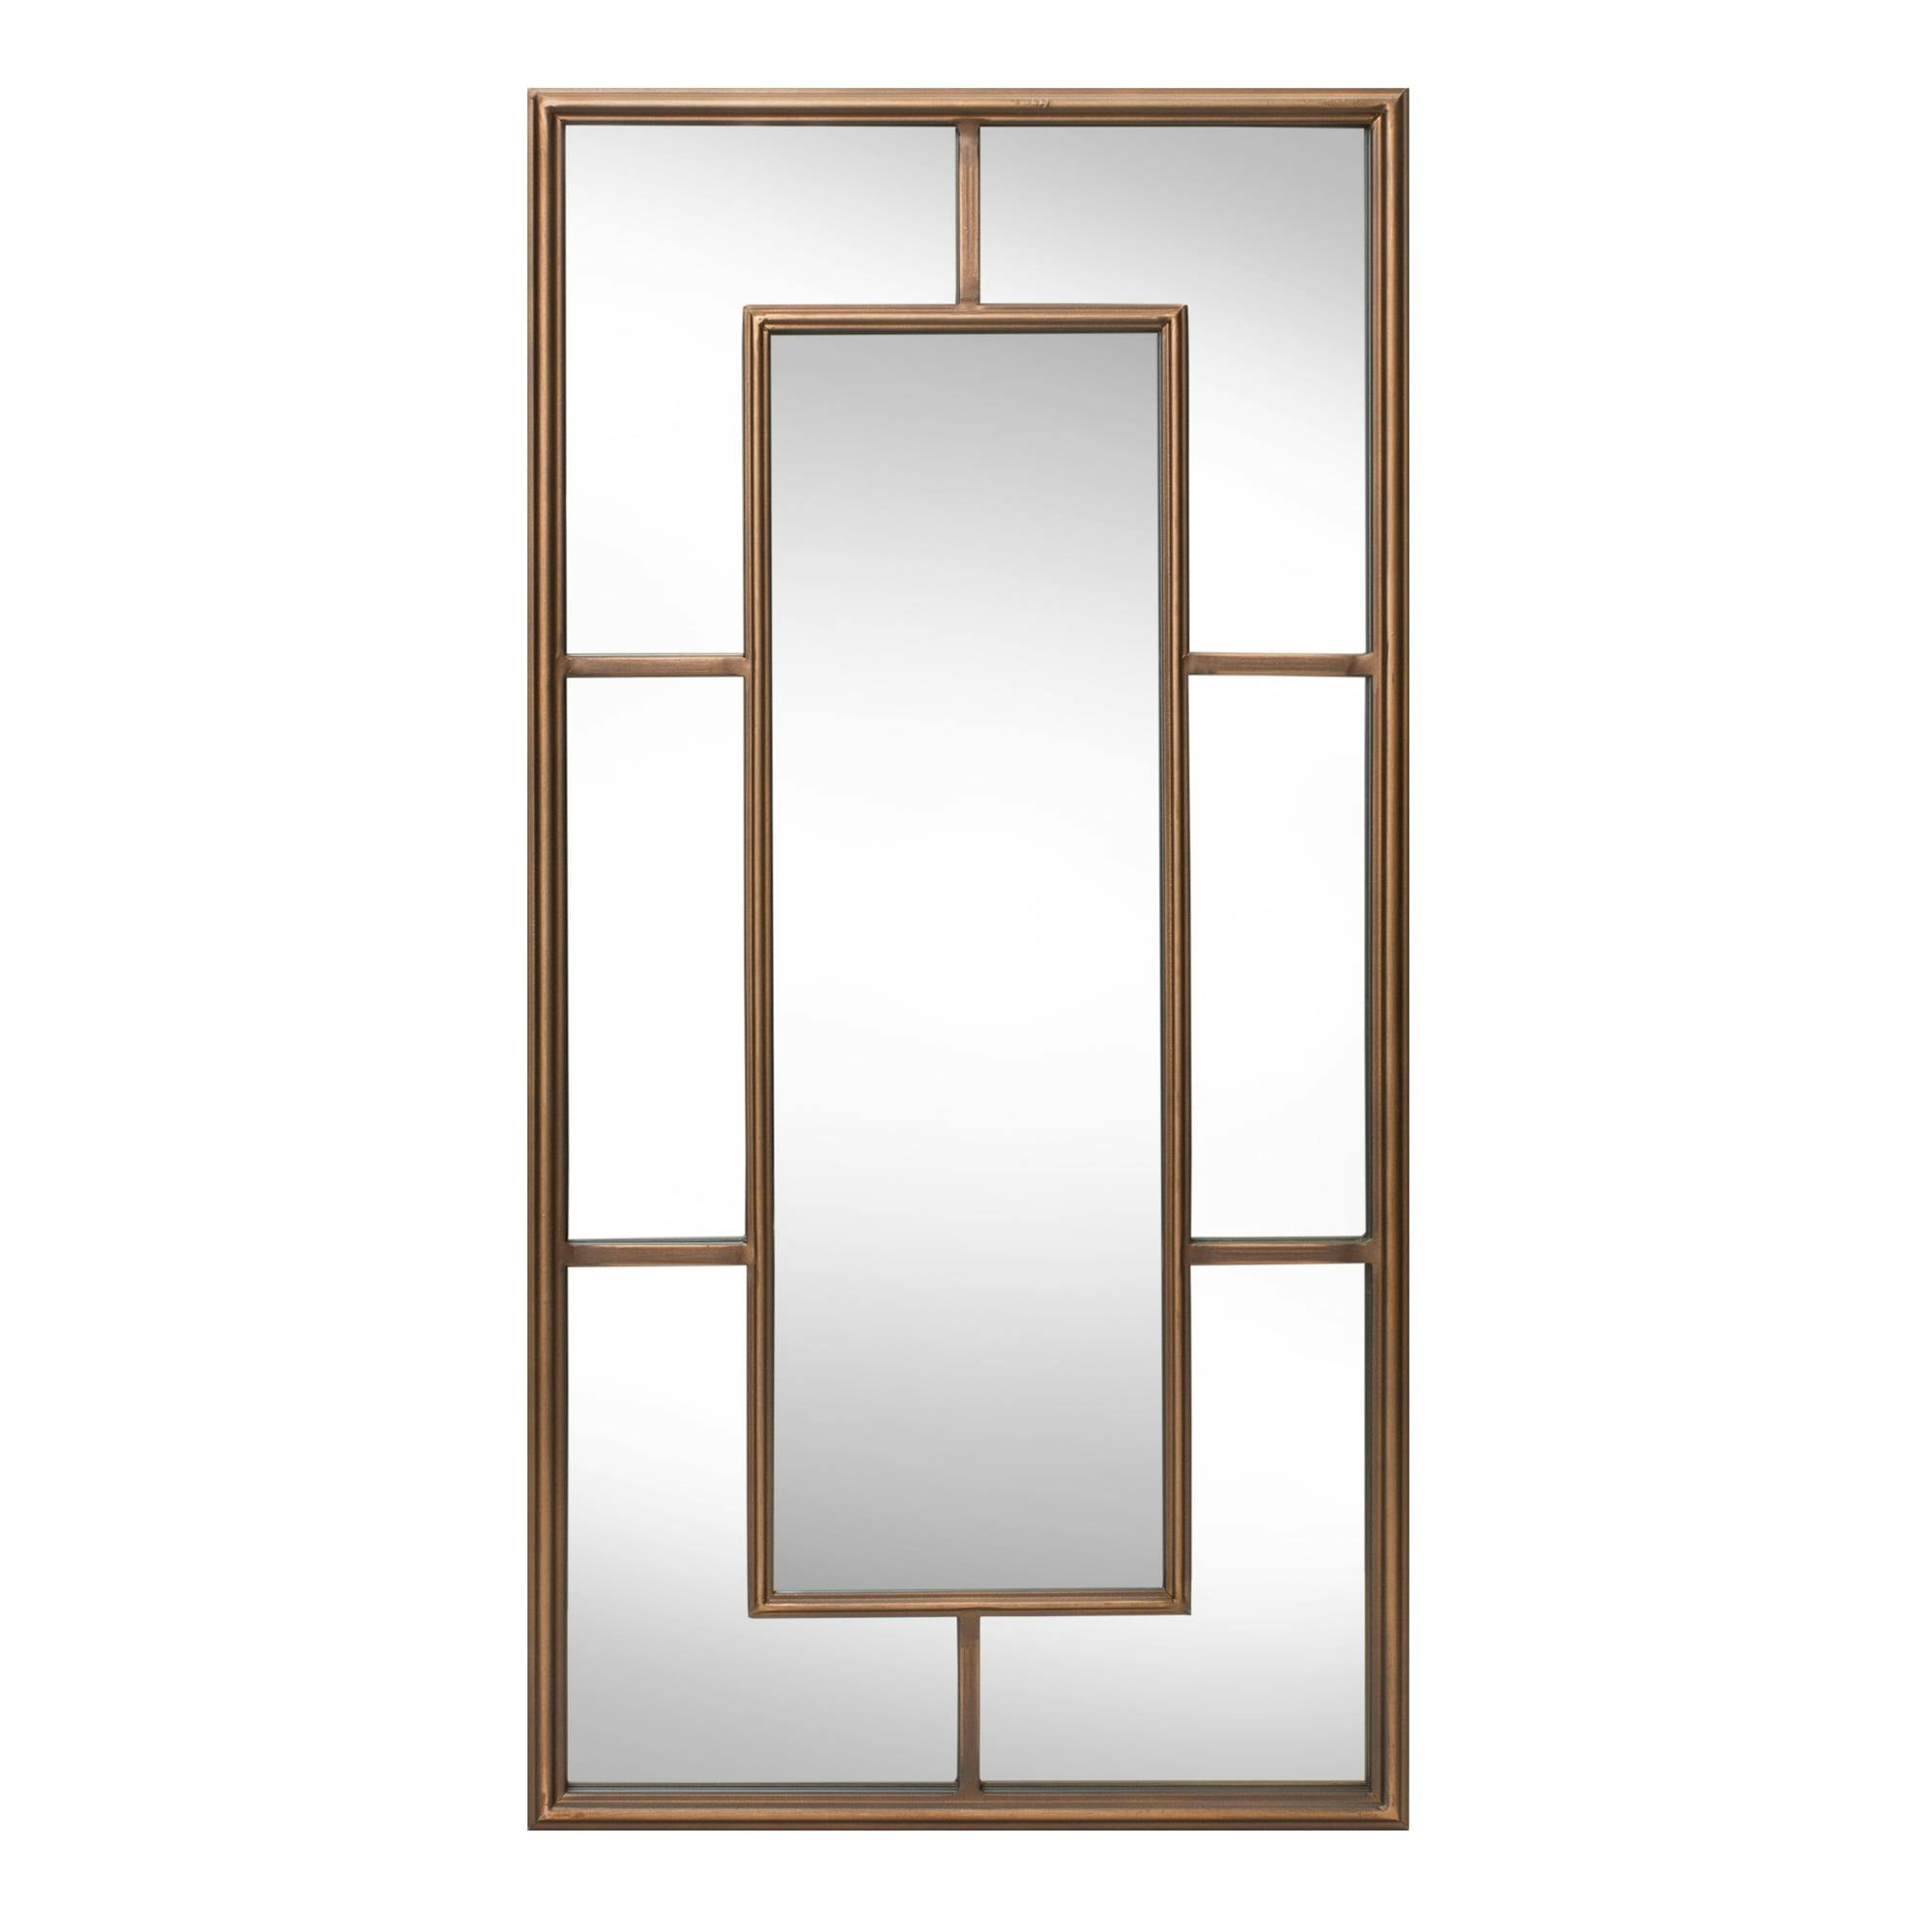 Chic Gold-Pane Iron Wall Mirror 31.5" Elegance for Any Room